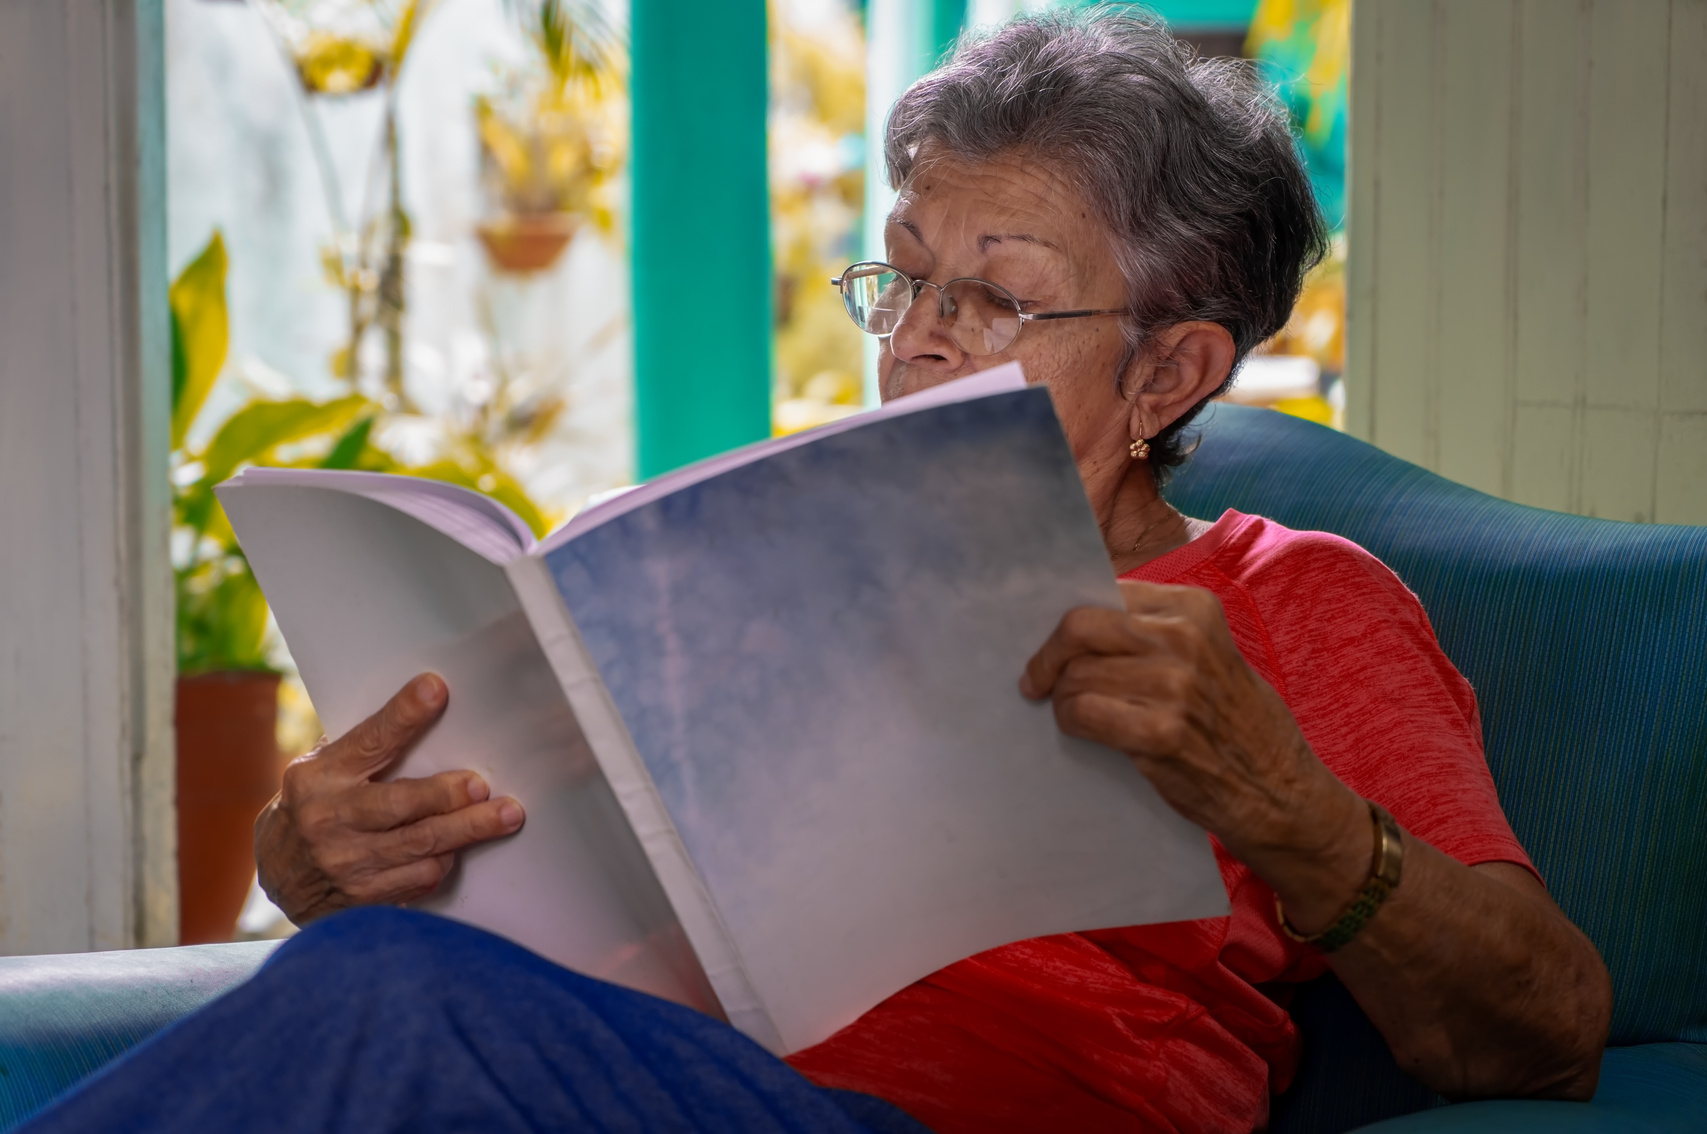 Older adult and reading